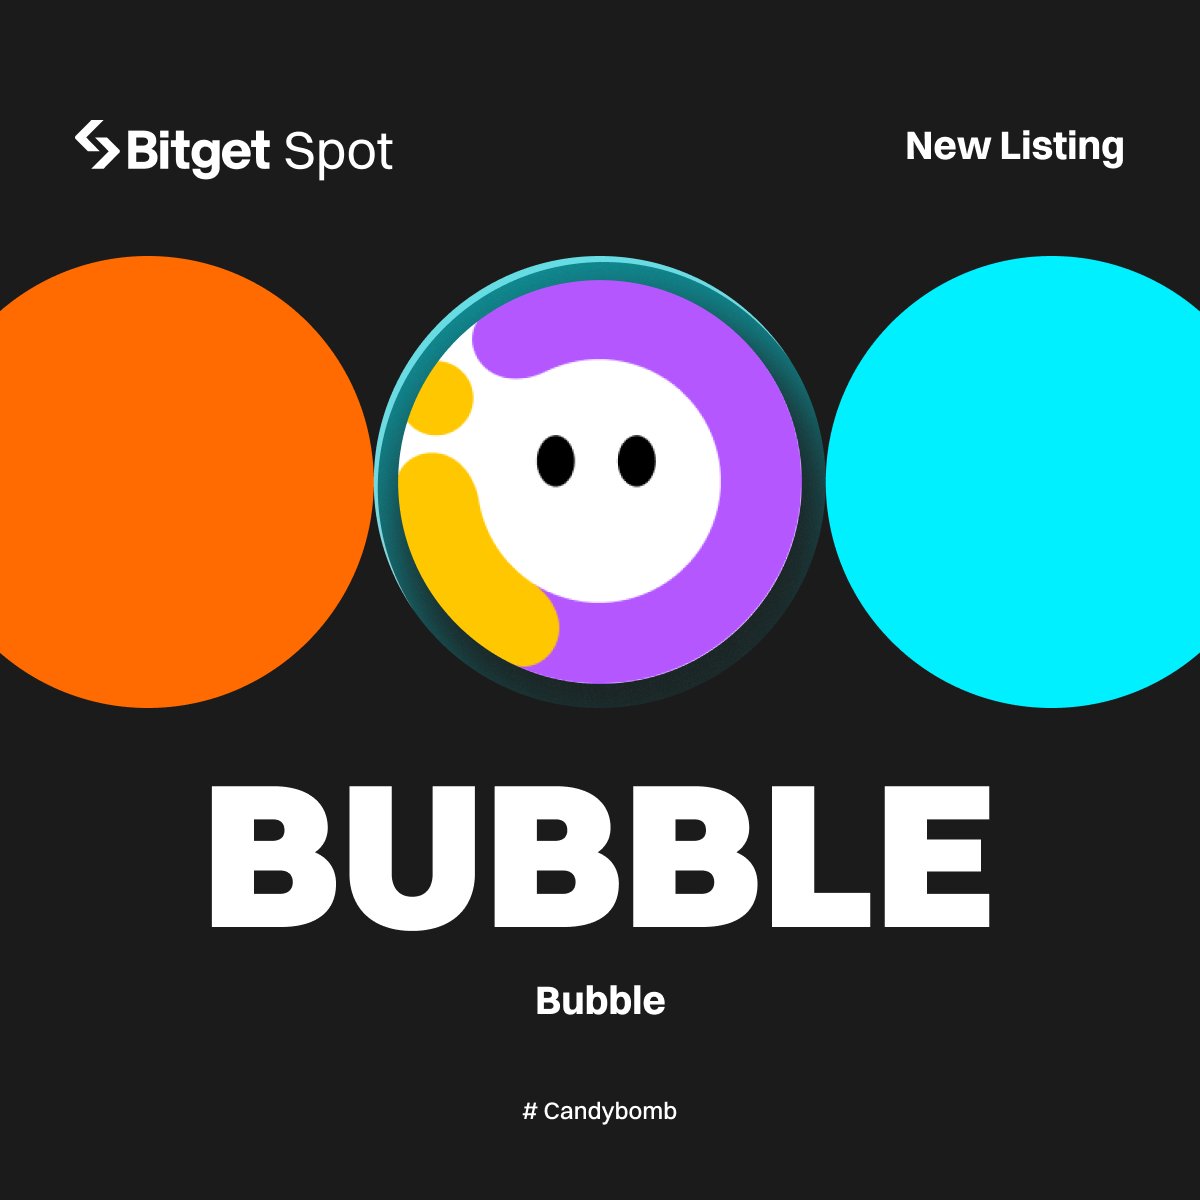 Initial Listing - $BUBBLE @Imaginary_Ones

#Bitget will list BUBBLE/USDT with 10,999,999 BUBBLE up for grabs! #BUBBLElistBitget

🔹Deposit: opened
🔹Trading starts: May 14, 10:00 AM (UTC)

More details: bitget.com/en/support/art…